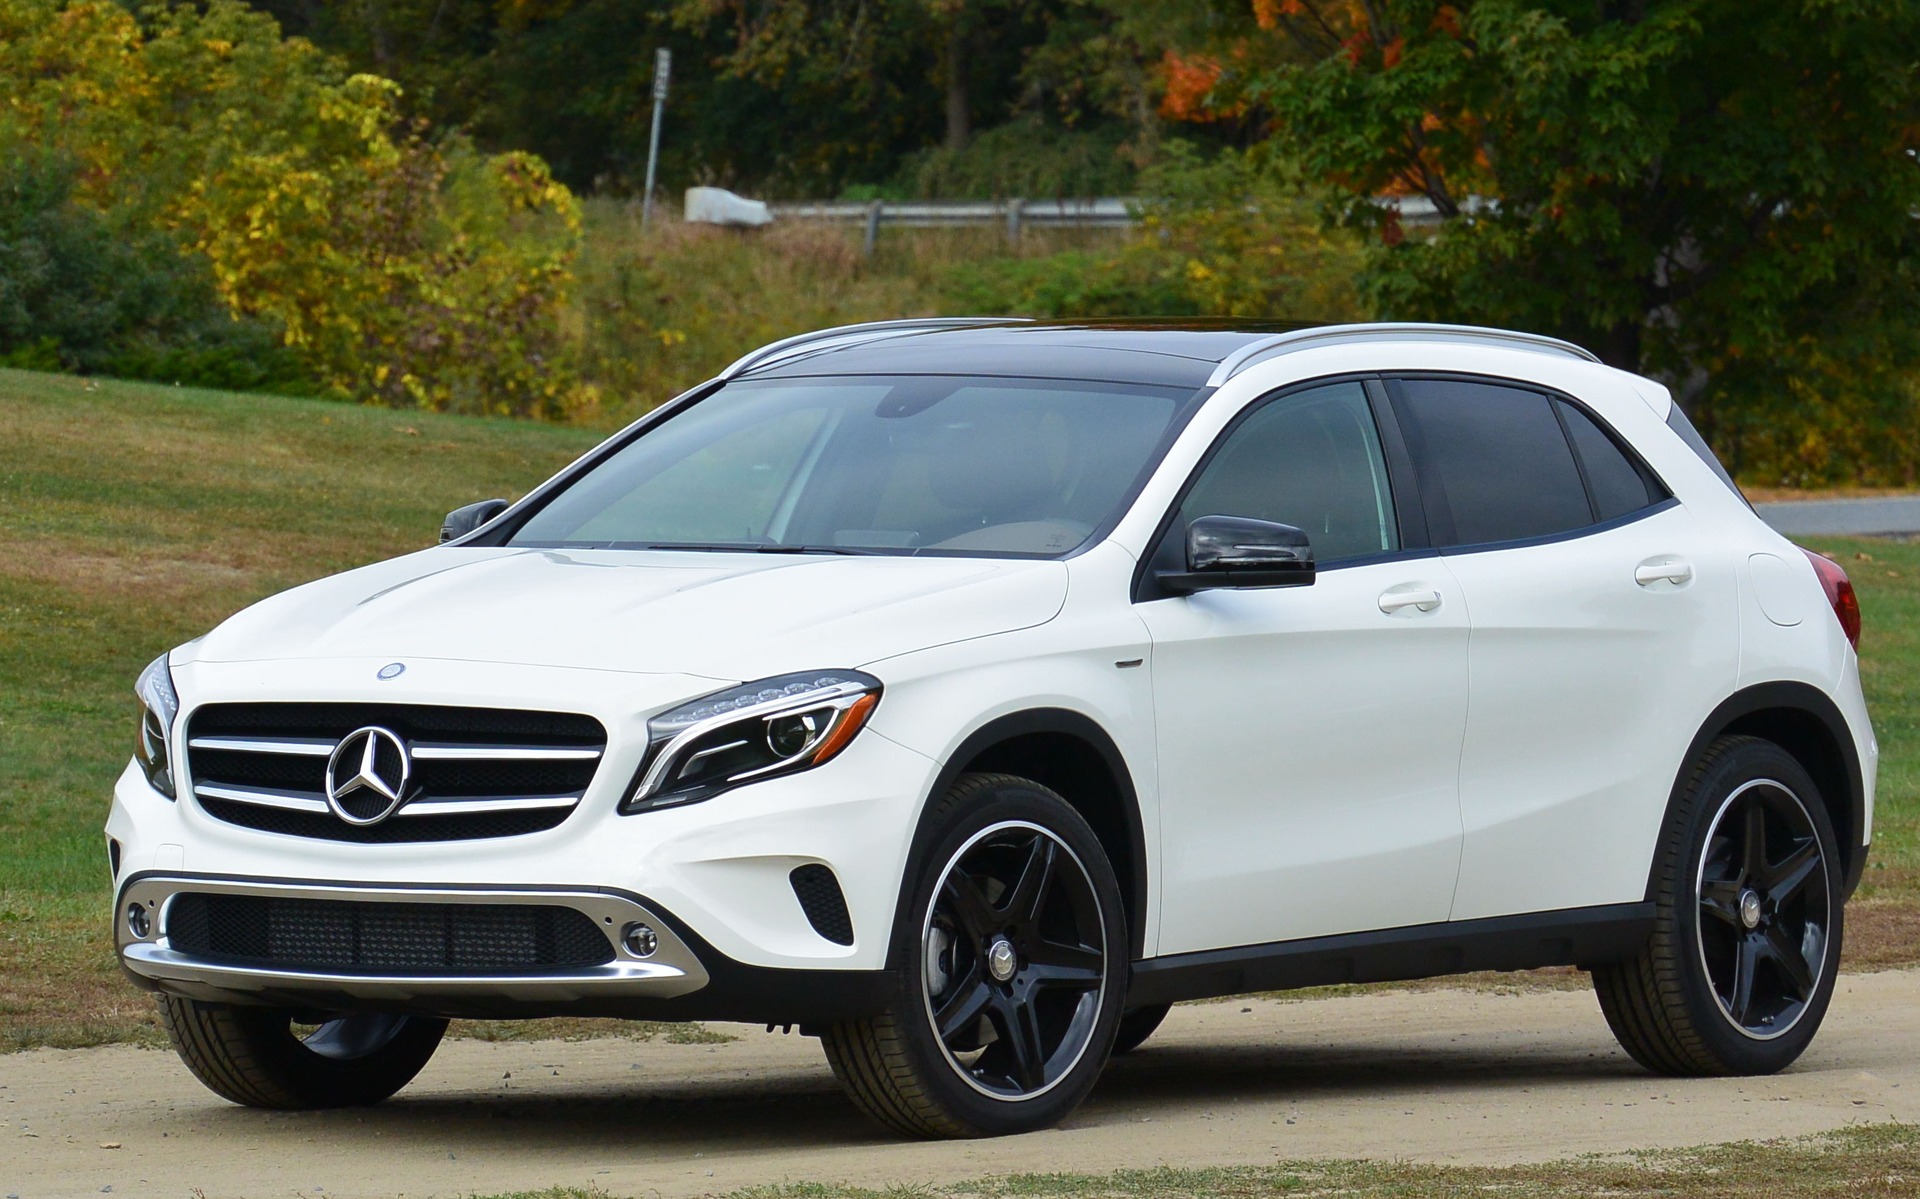 2015 Mercedes-Benz GLA: Practical or Sporty? - The Car Guide